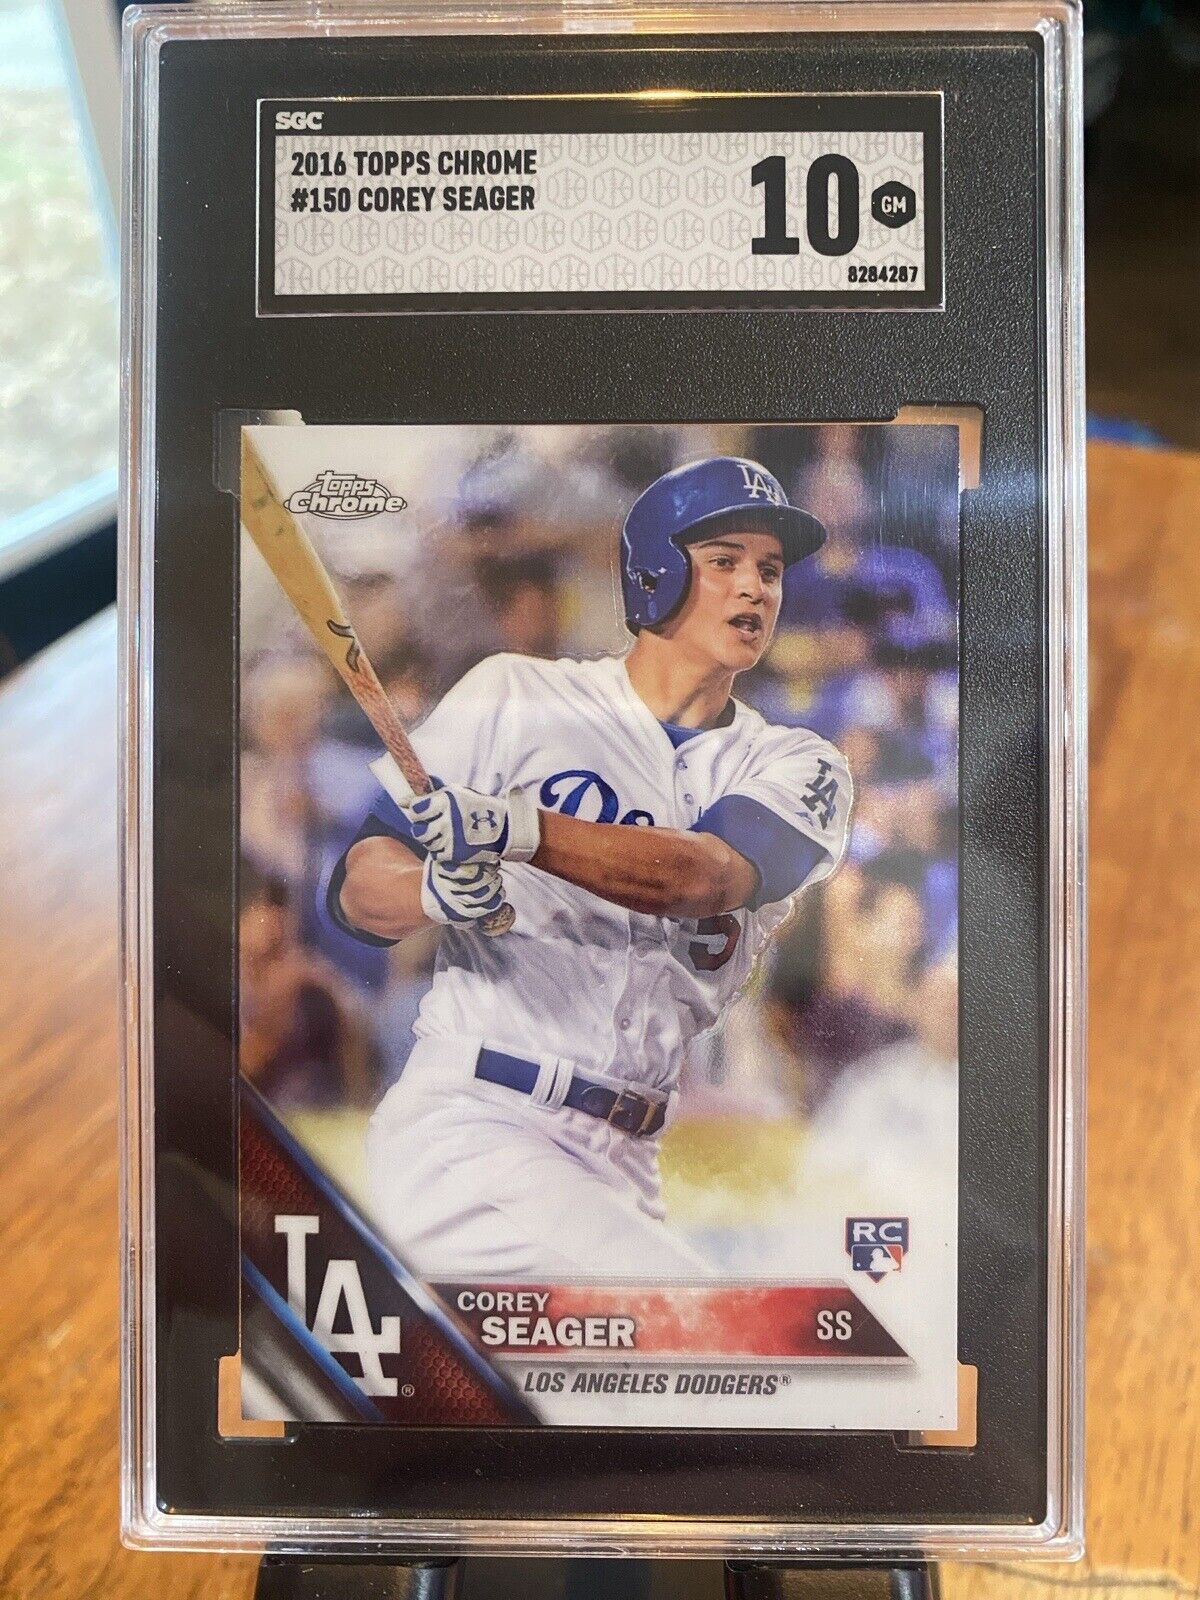 2016 Topps Chrome Corey Seager Base Rookie Card #150 SGC 10 Los Angeles Dodgers